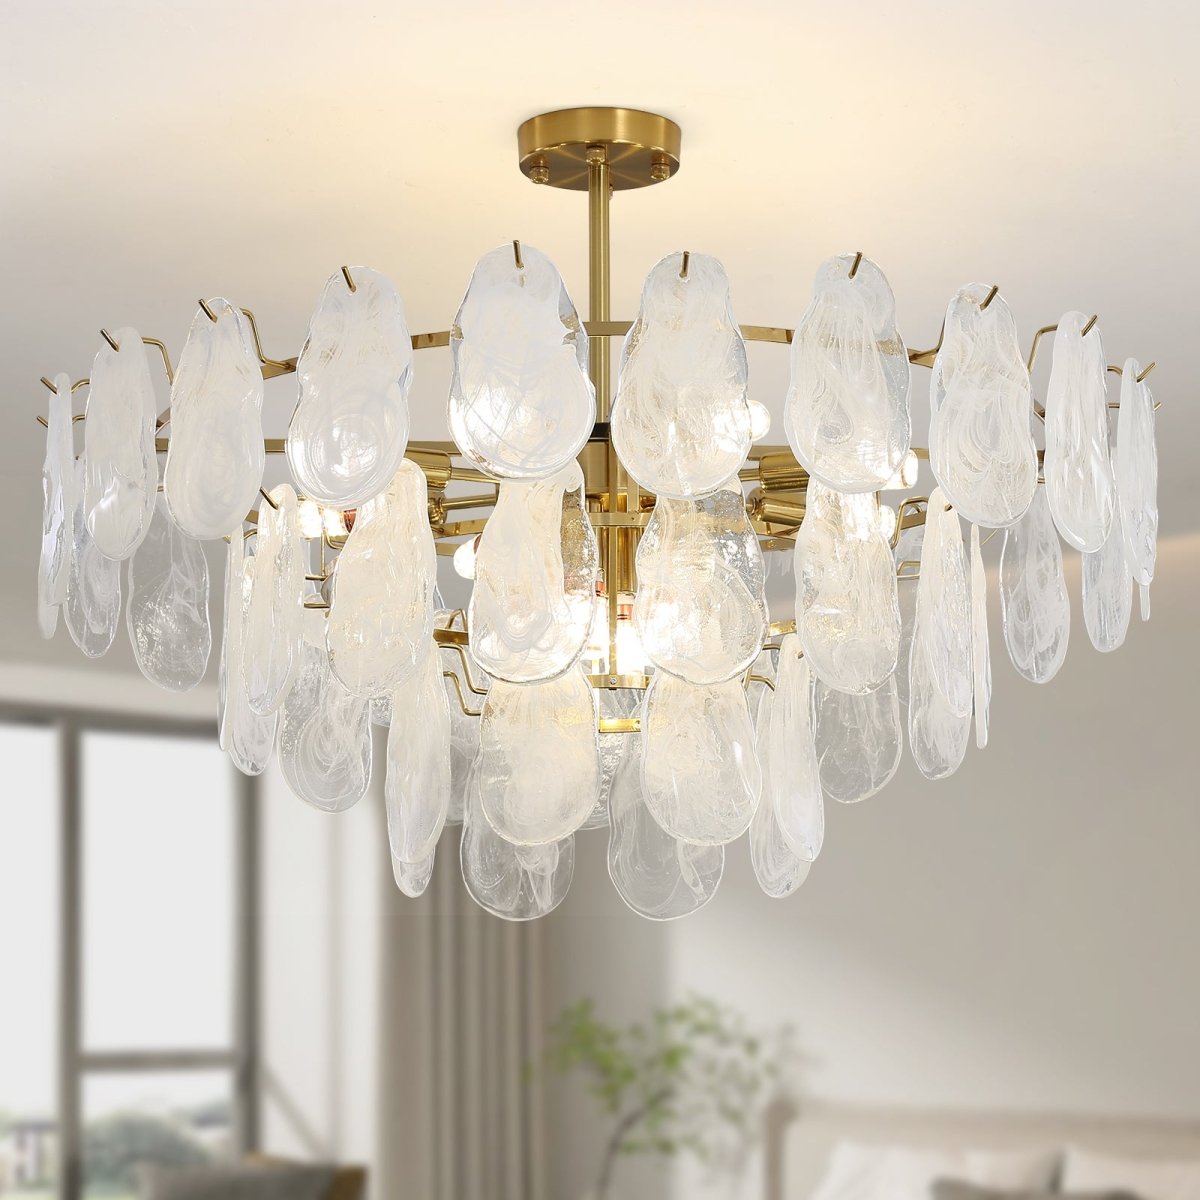 Wansi Shine 12-Light Modern Semi Flush Mount Ceiling Light, 31.5" or 27.5" Crystal Chandelier Ceiling Light Fixtures with 3-Tire Cloud Glass Lampshade for Bedroom, Included 12 LED Bulbs - WS-FPC53-D800-12C3 1 | DEPULEY